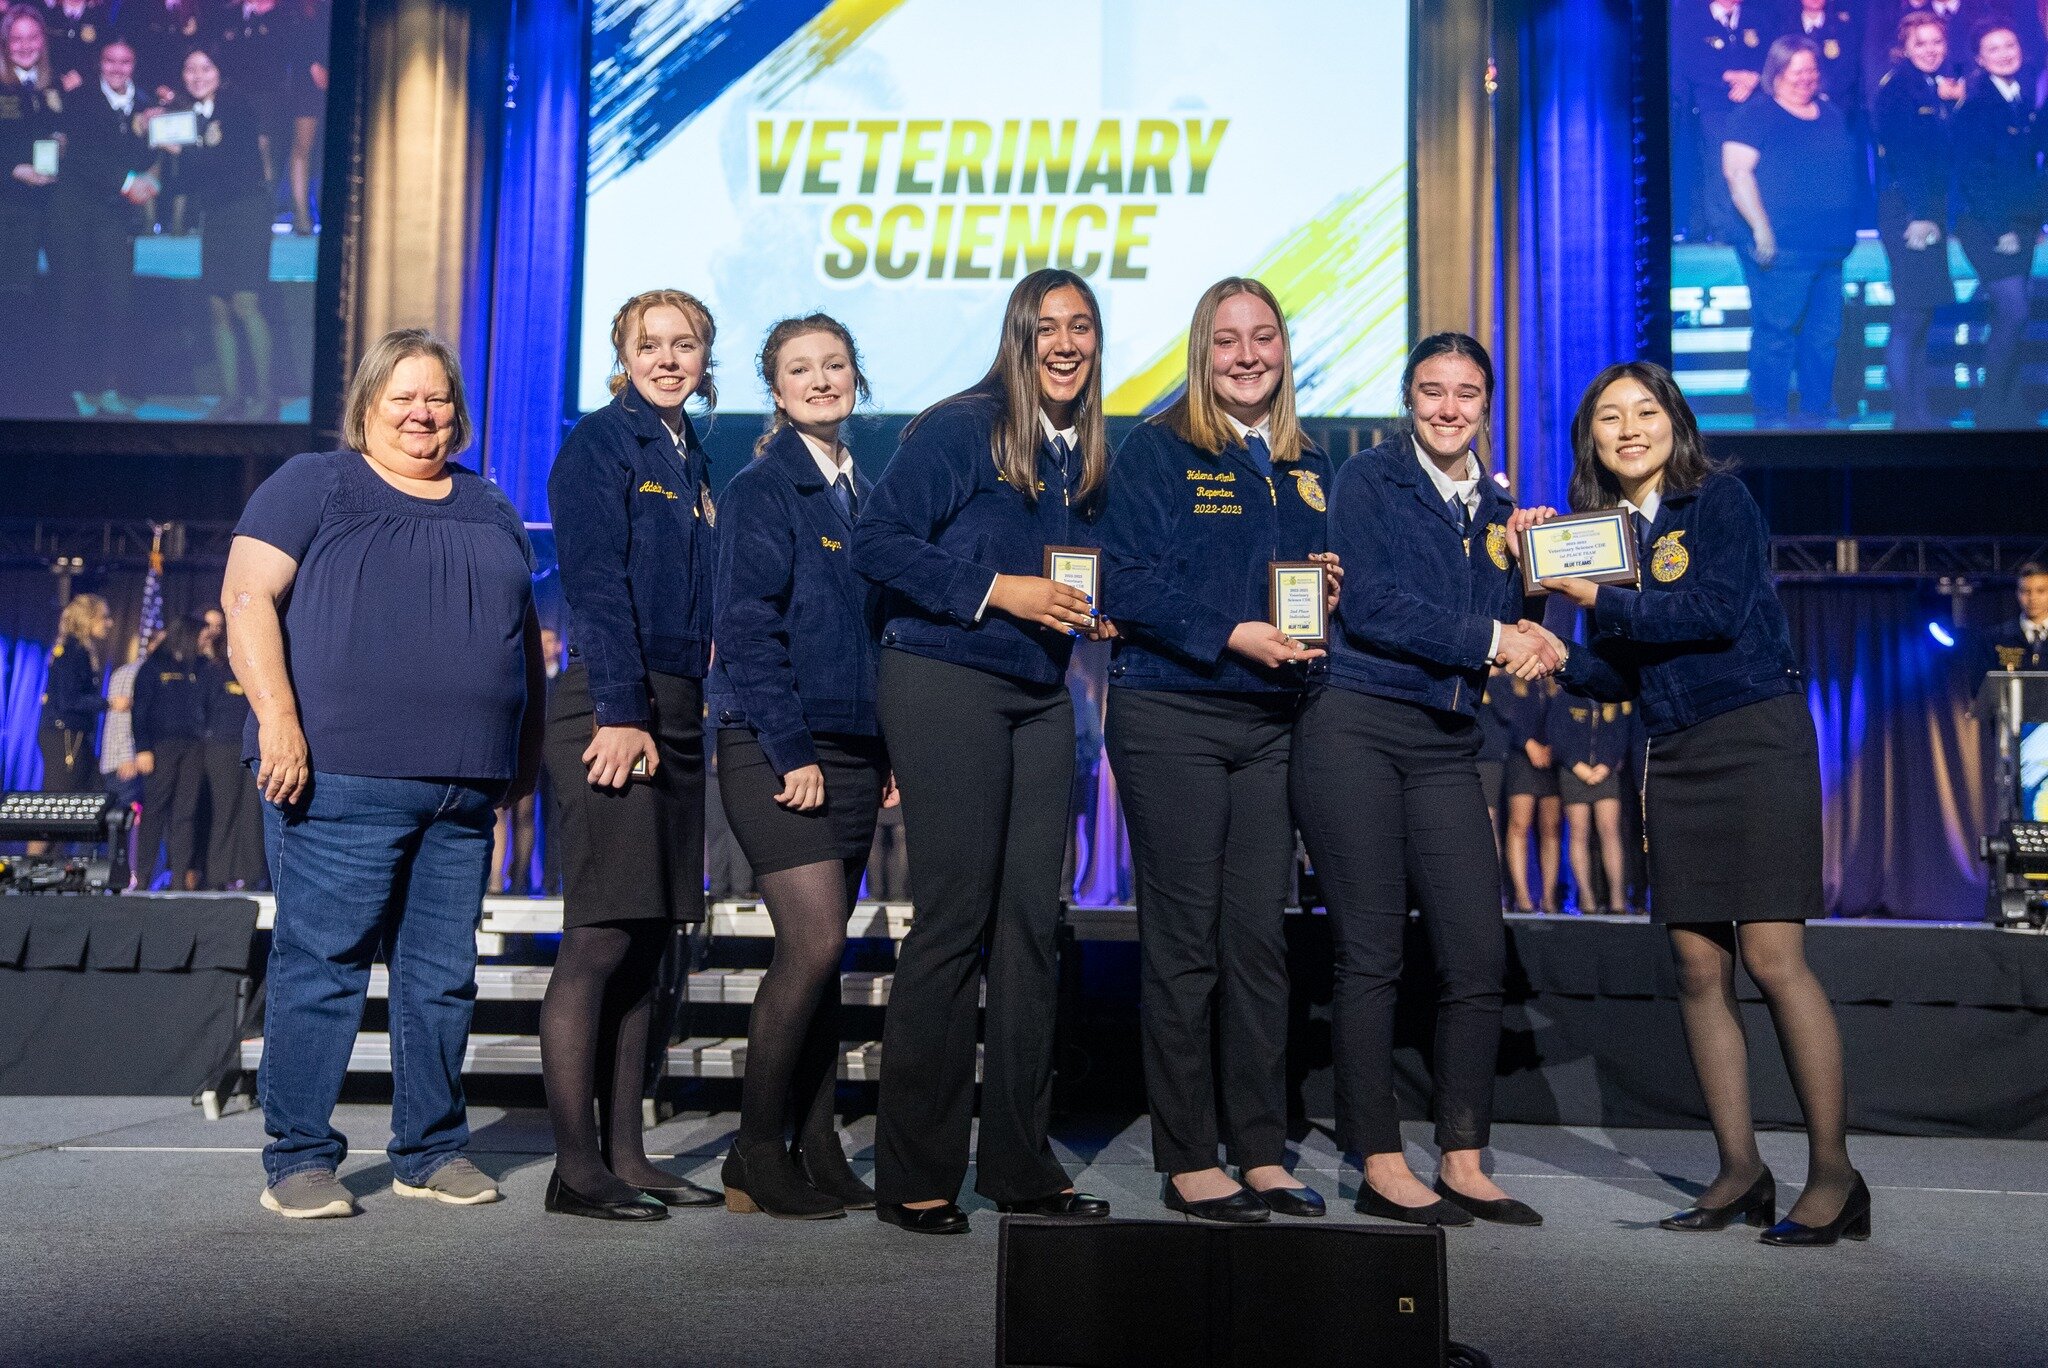 🏆 WINNER UPDATE 🏆

Congratulations to our State Champion Veterinary Science CDE team, Stanwood! 🥼🐈

Team Results:
&raquo; 2nd :: Lynden-Christian
&raquo; 3rd :: Ferndale
&raquo; 4th :: Granite Falls
&raquo; 5th :: Meridian
&raquo; 6th :: Yelm
&ra